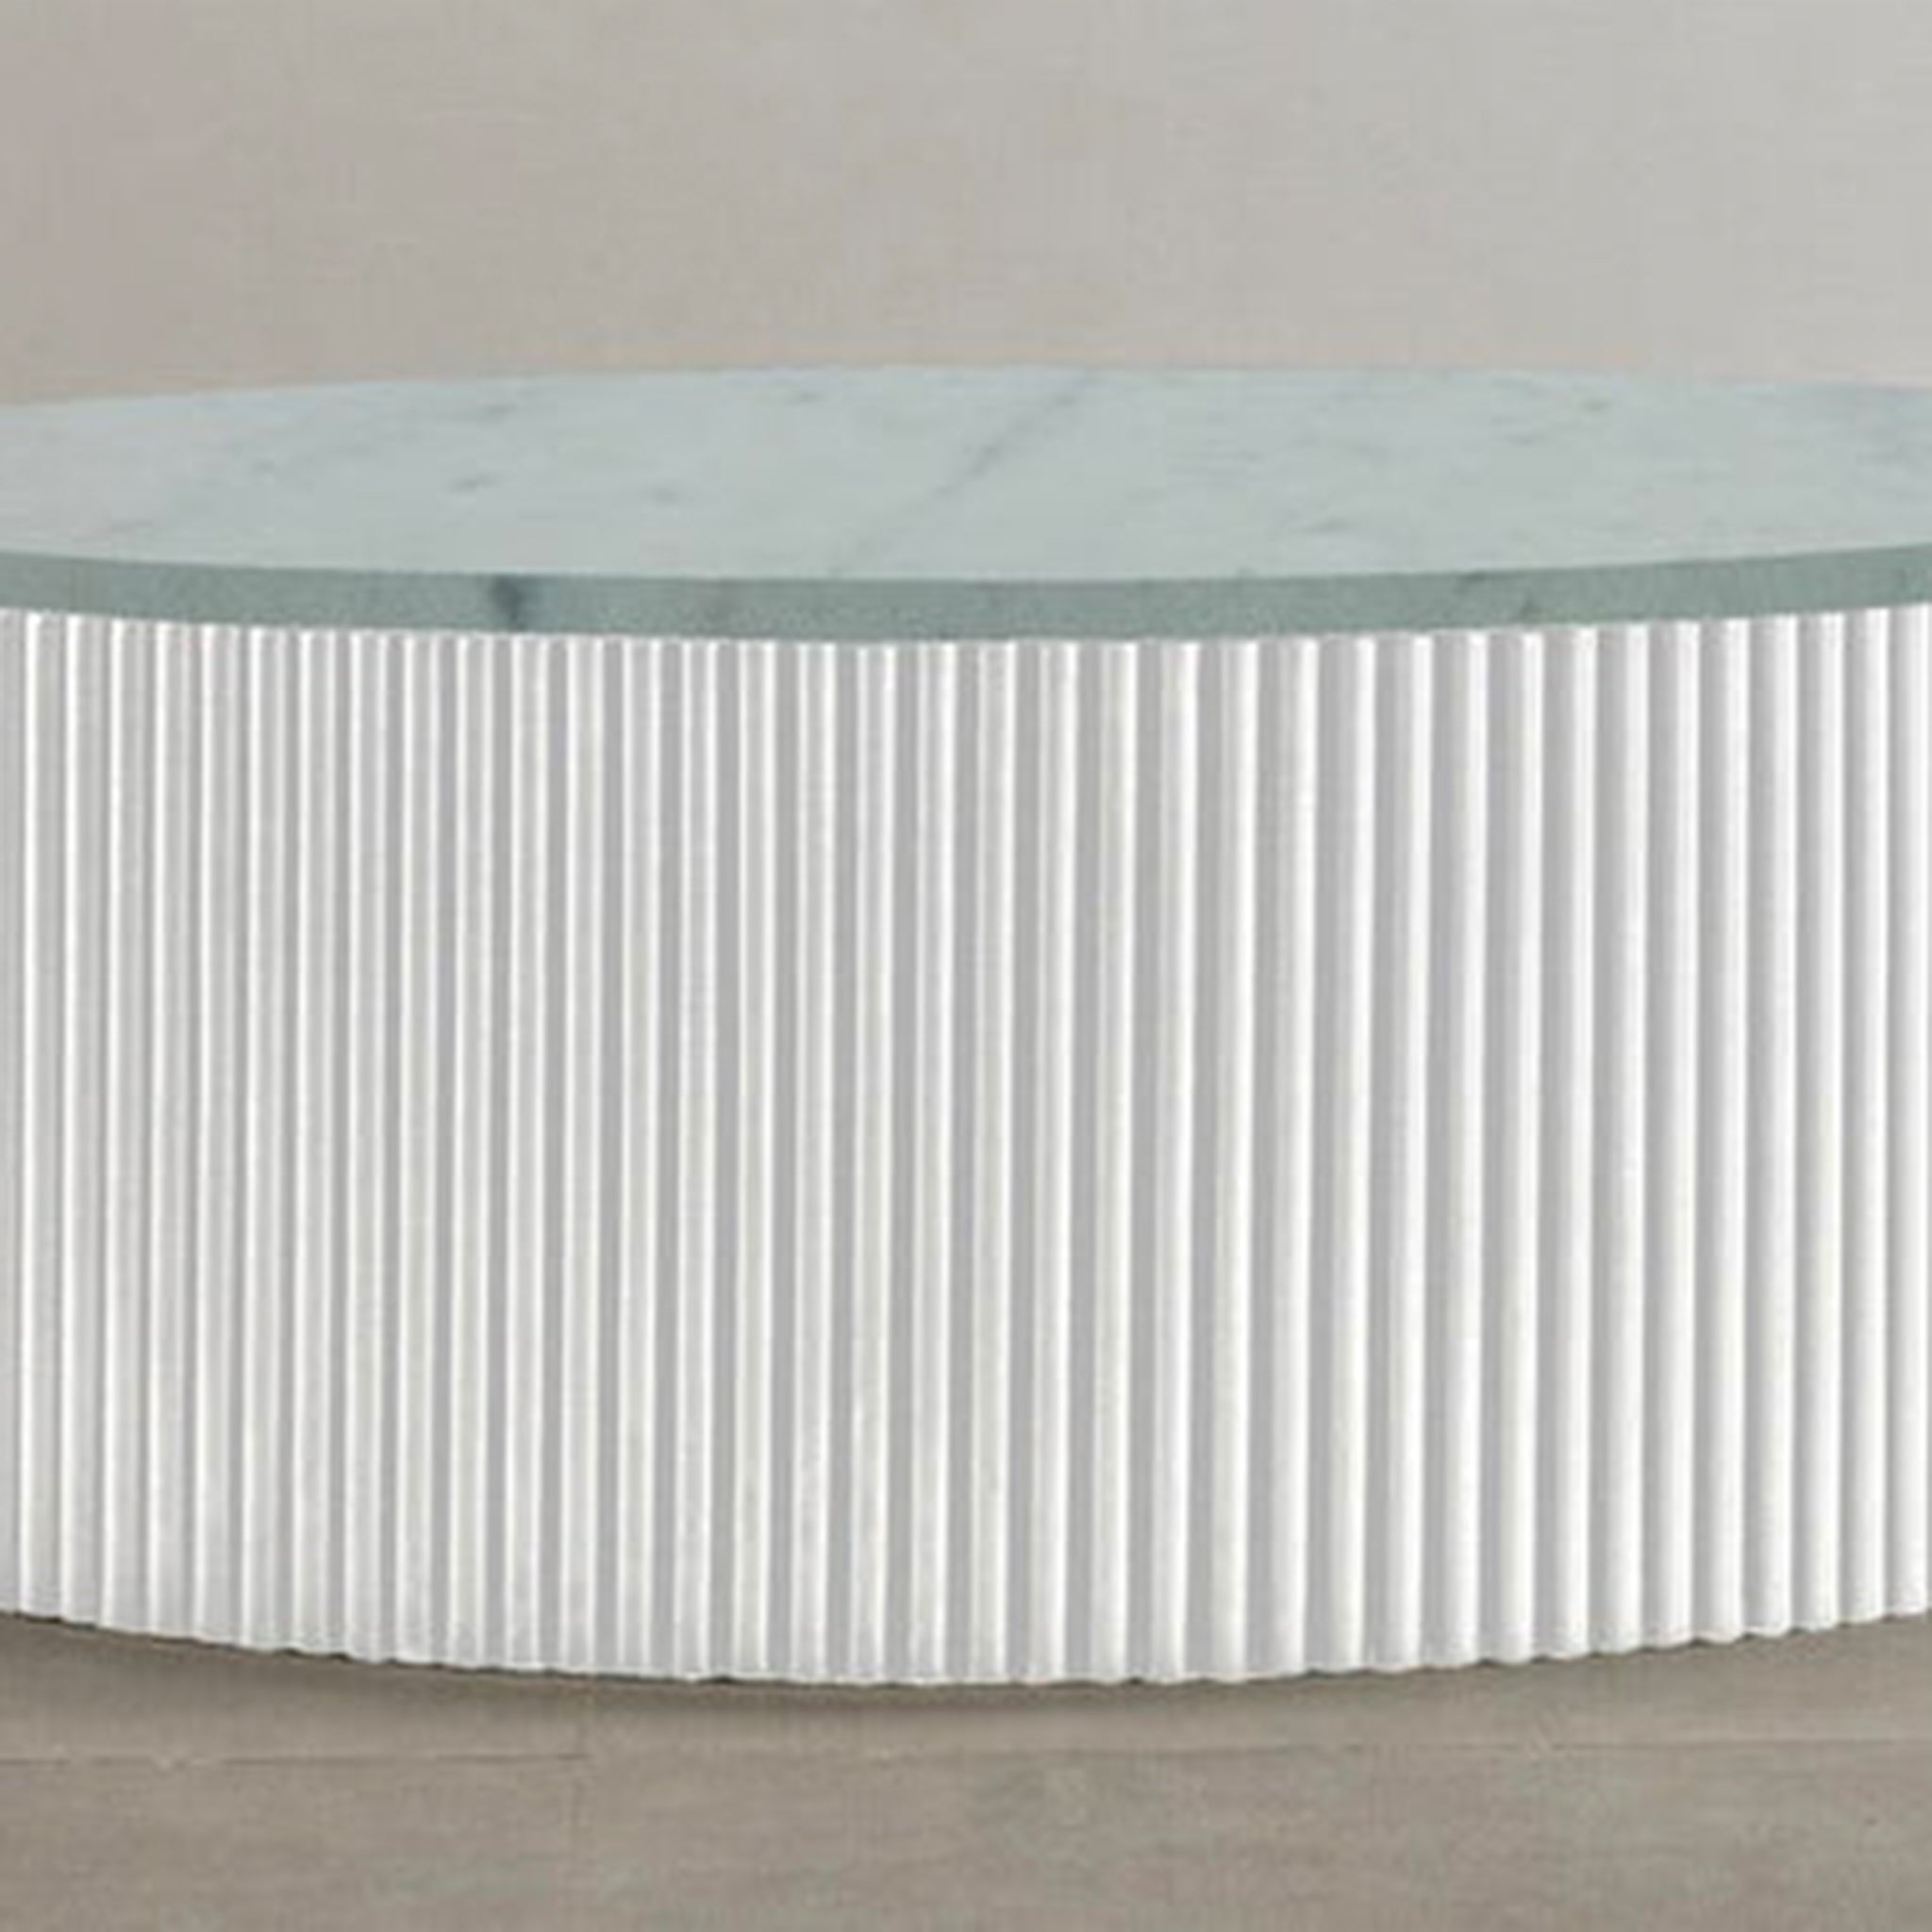 "Elegant circular table with fluted sides and smooth top"